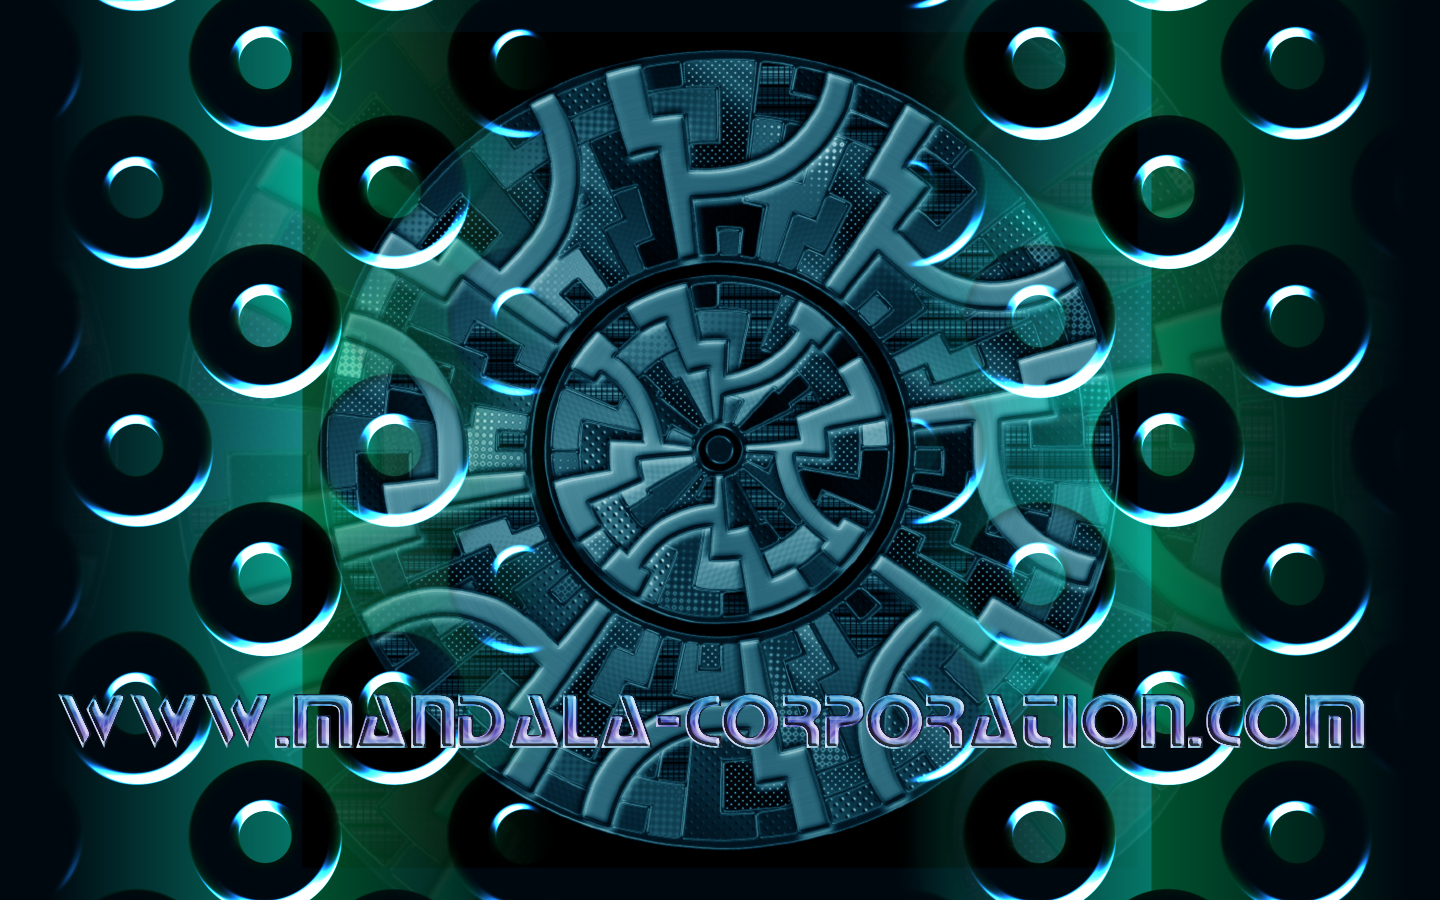 2013 mandala corporation all rights reserved